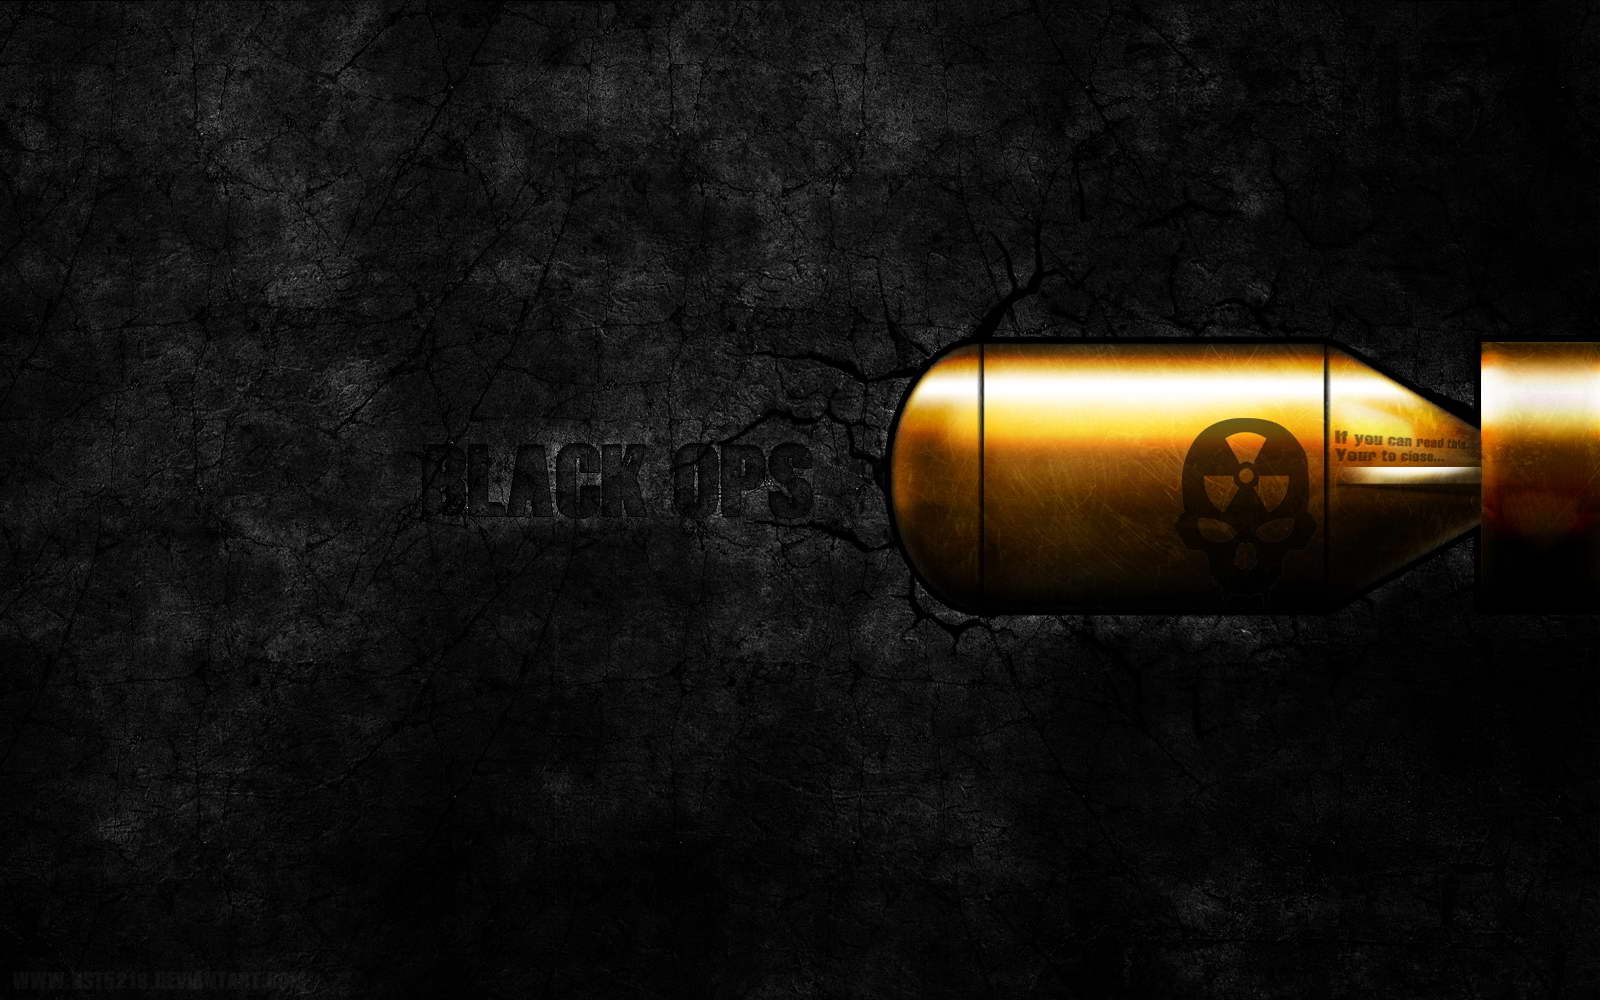 Black Ops Hd Wallpapers in Games Imagescicom